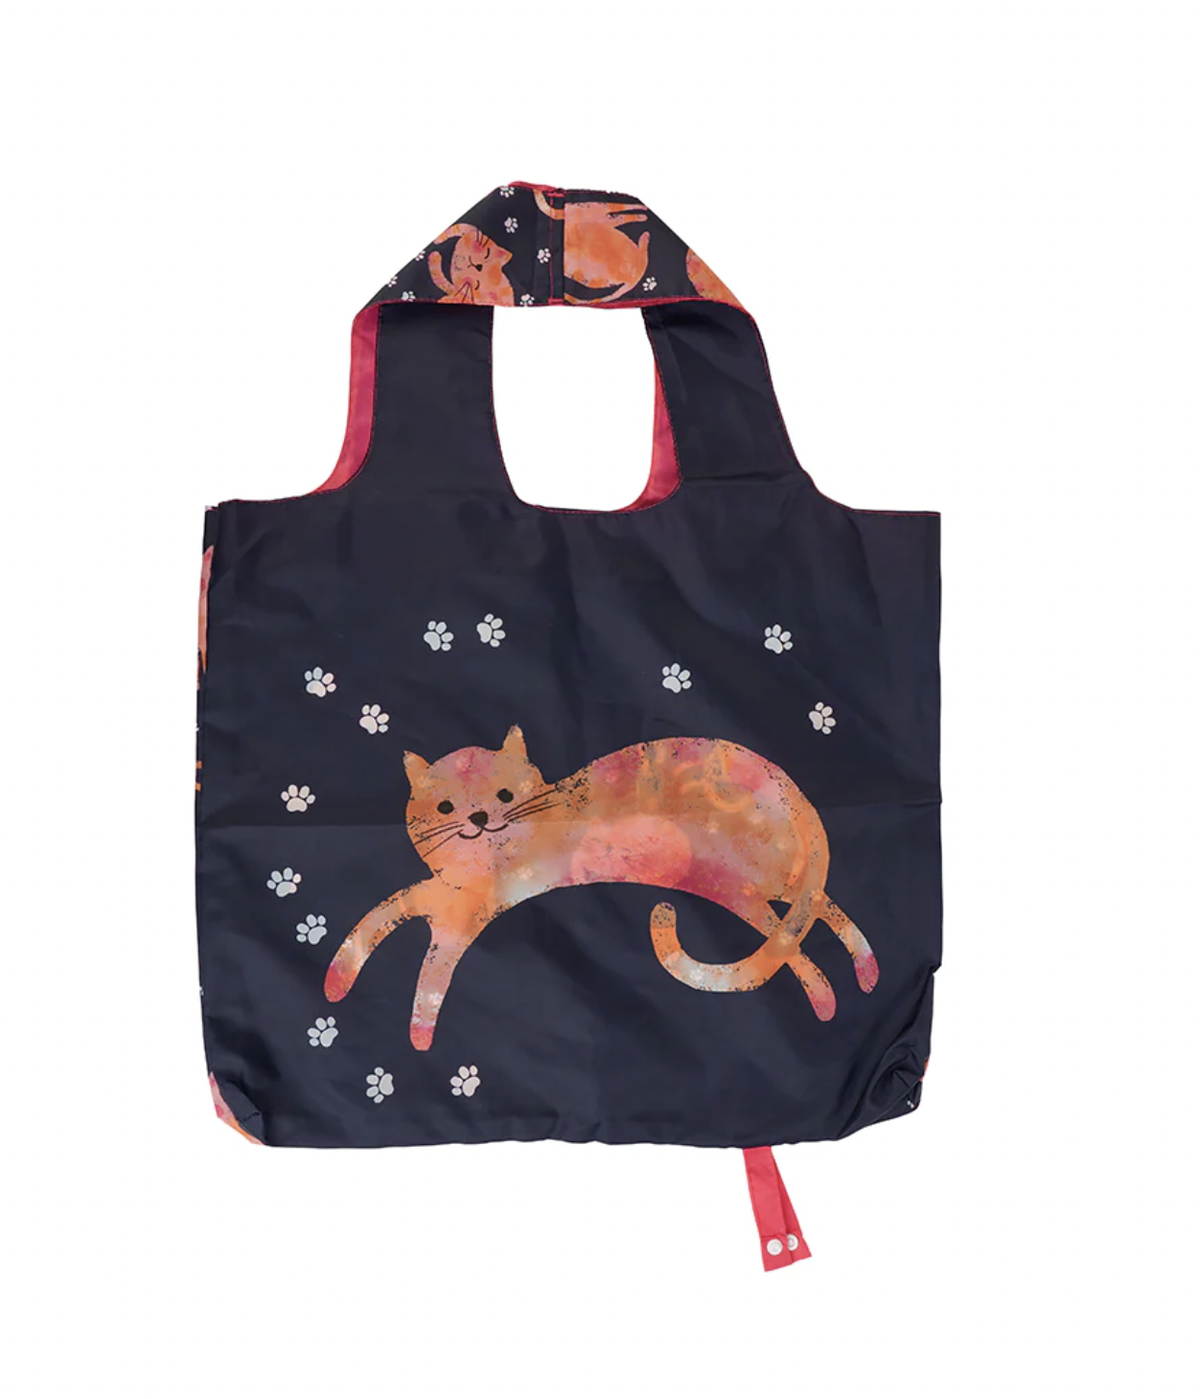 SHOPPING TOTE - COOL CATS